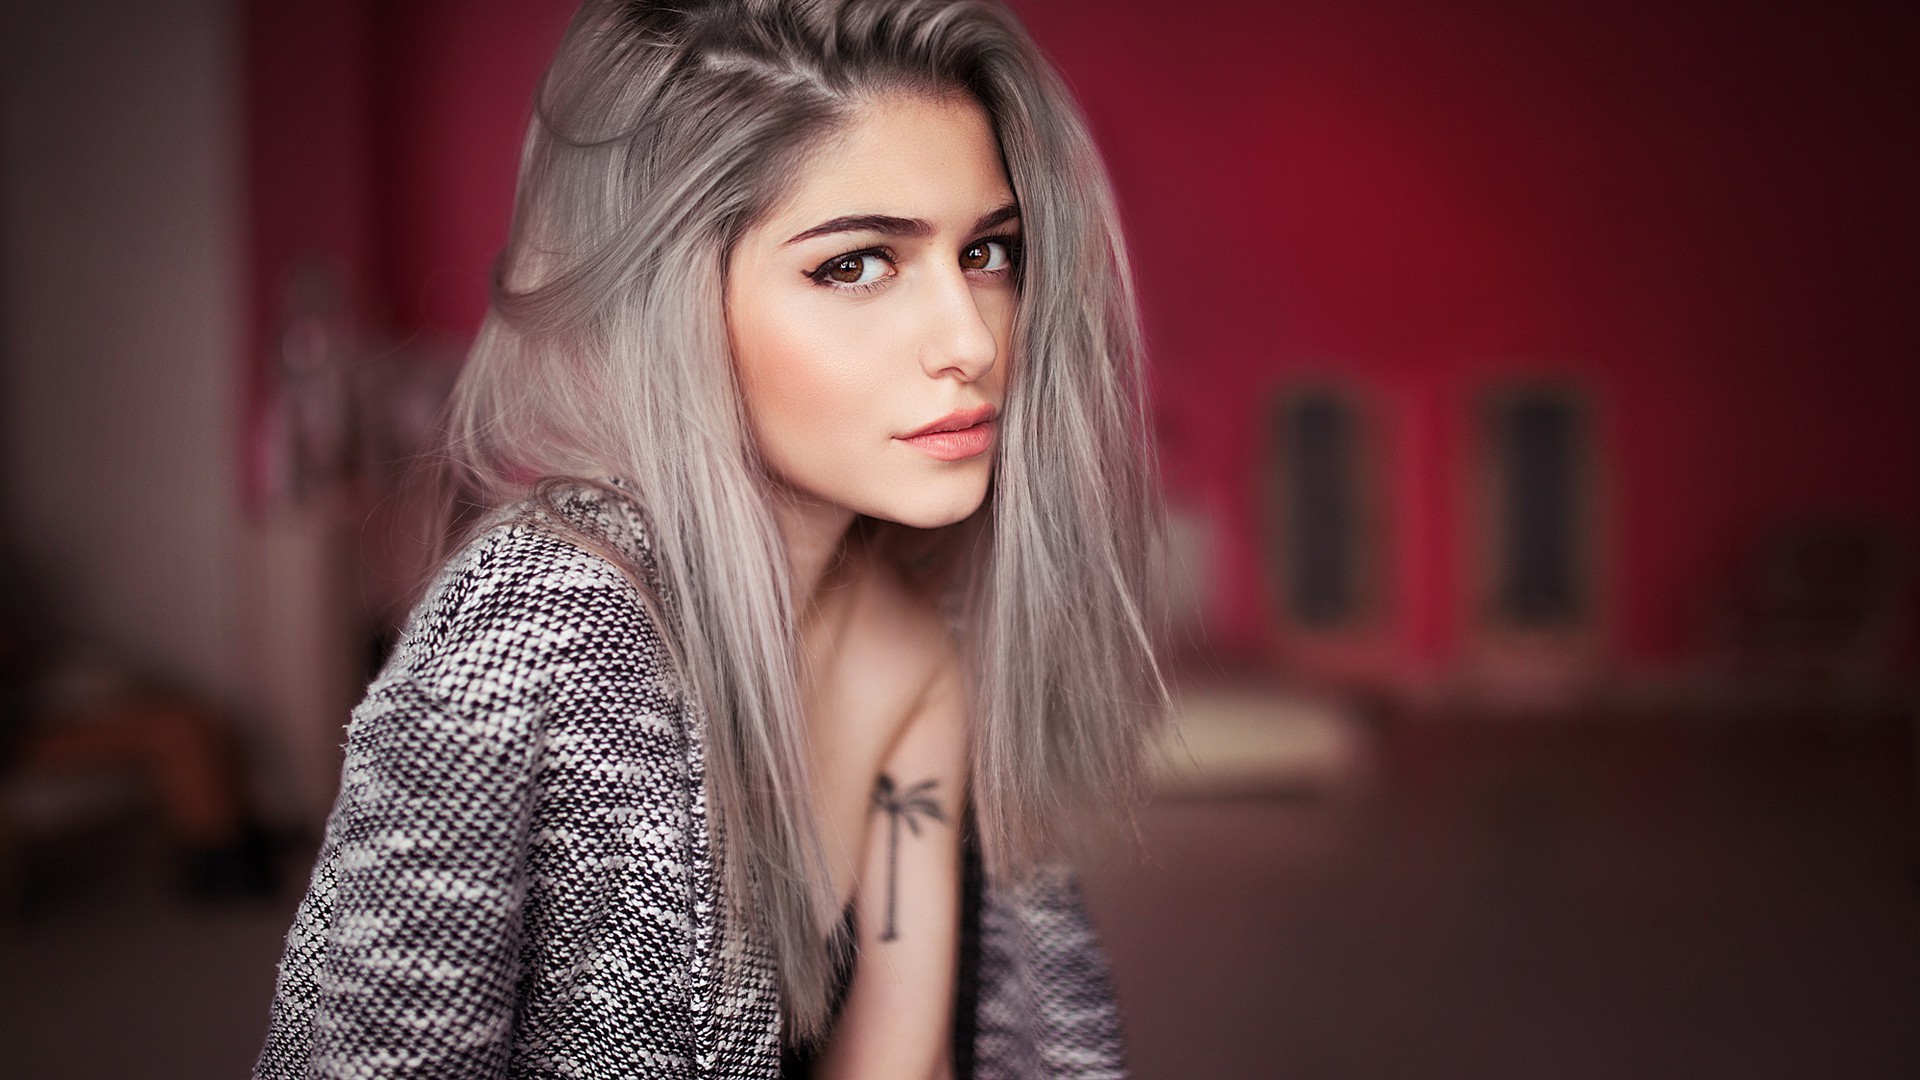 women, Model, Dyed Hair, Looking At Viewer, Face, Portrait, Galina Rover, Ivan Gorokhov, Brown Eyes, Sweater, Tattoo, Depth Of Field, Room, Long Hair Wallpaper